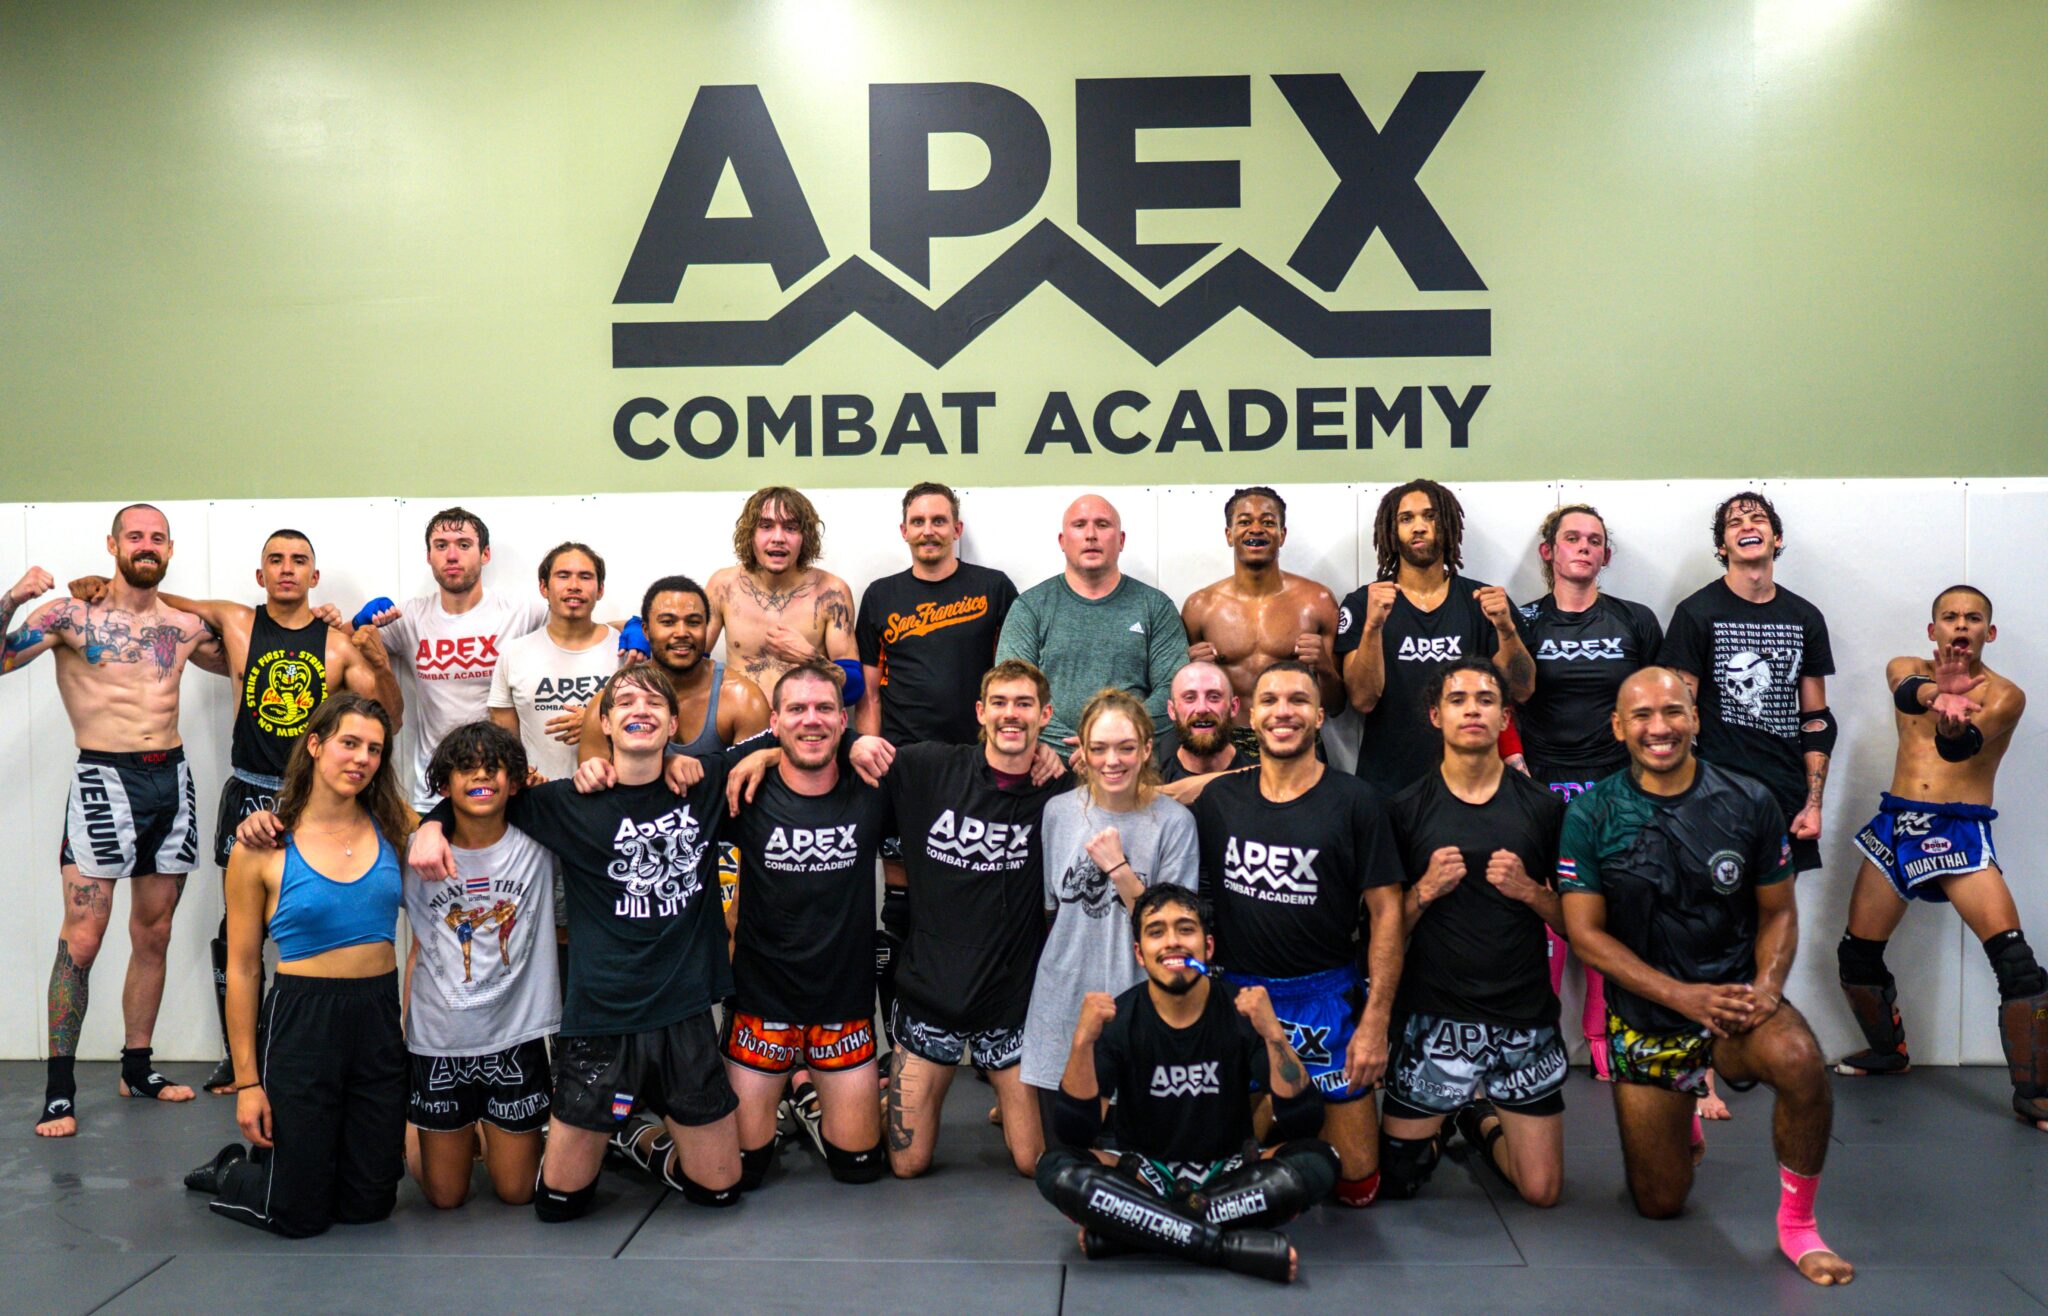 Apex Combat Academy About Us